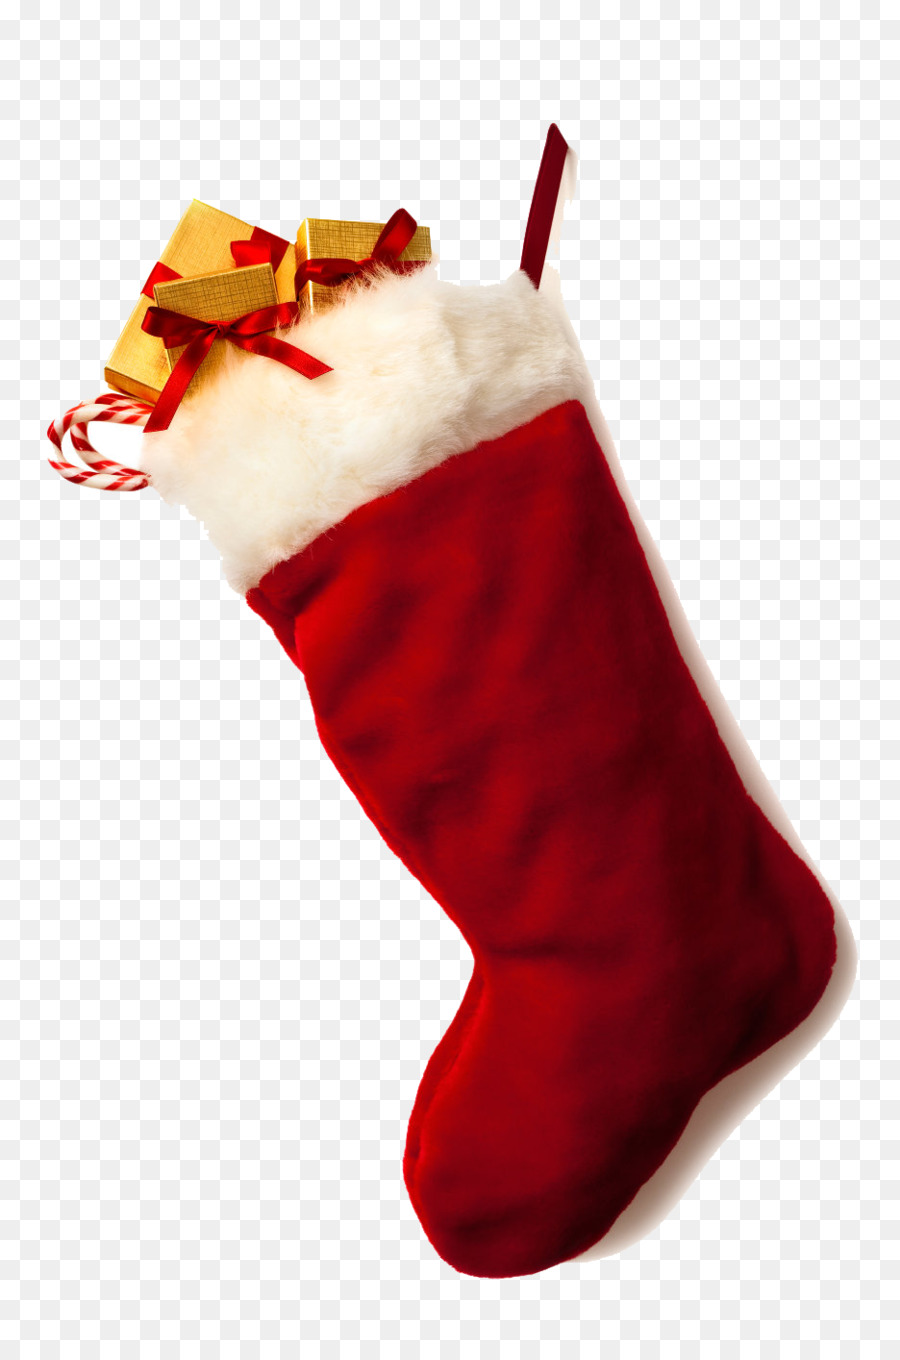 Christmas stocking Santa Claus Candy cane - Christmas Stocking PNG Clipart png download - 936*1404 - Free Transparent Christmas Stocking png Download.